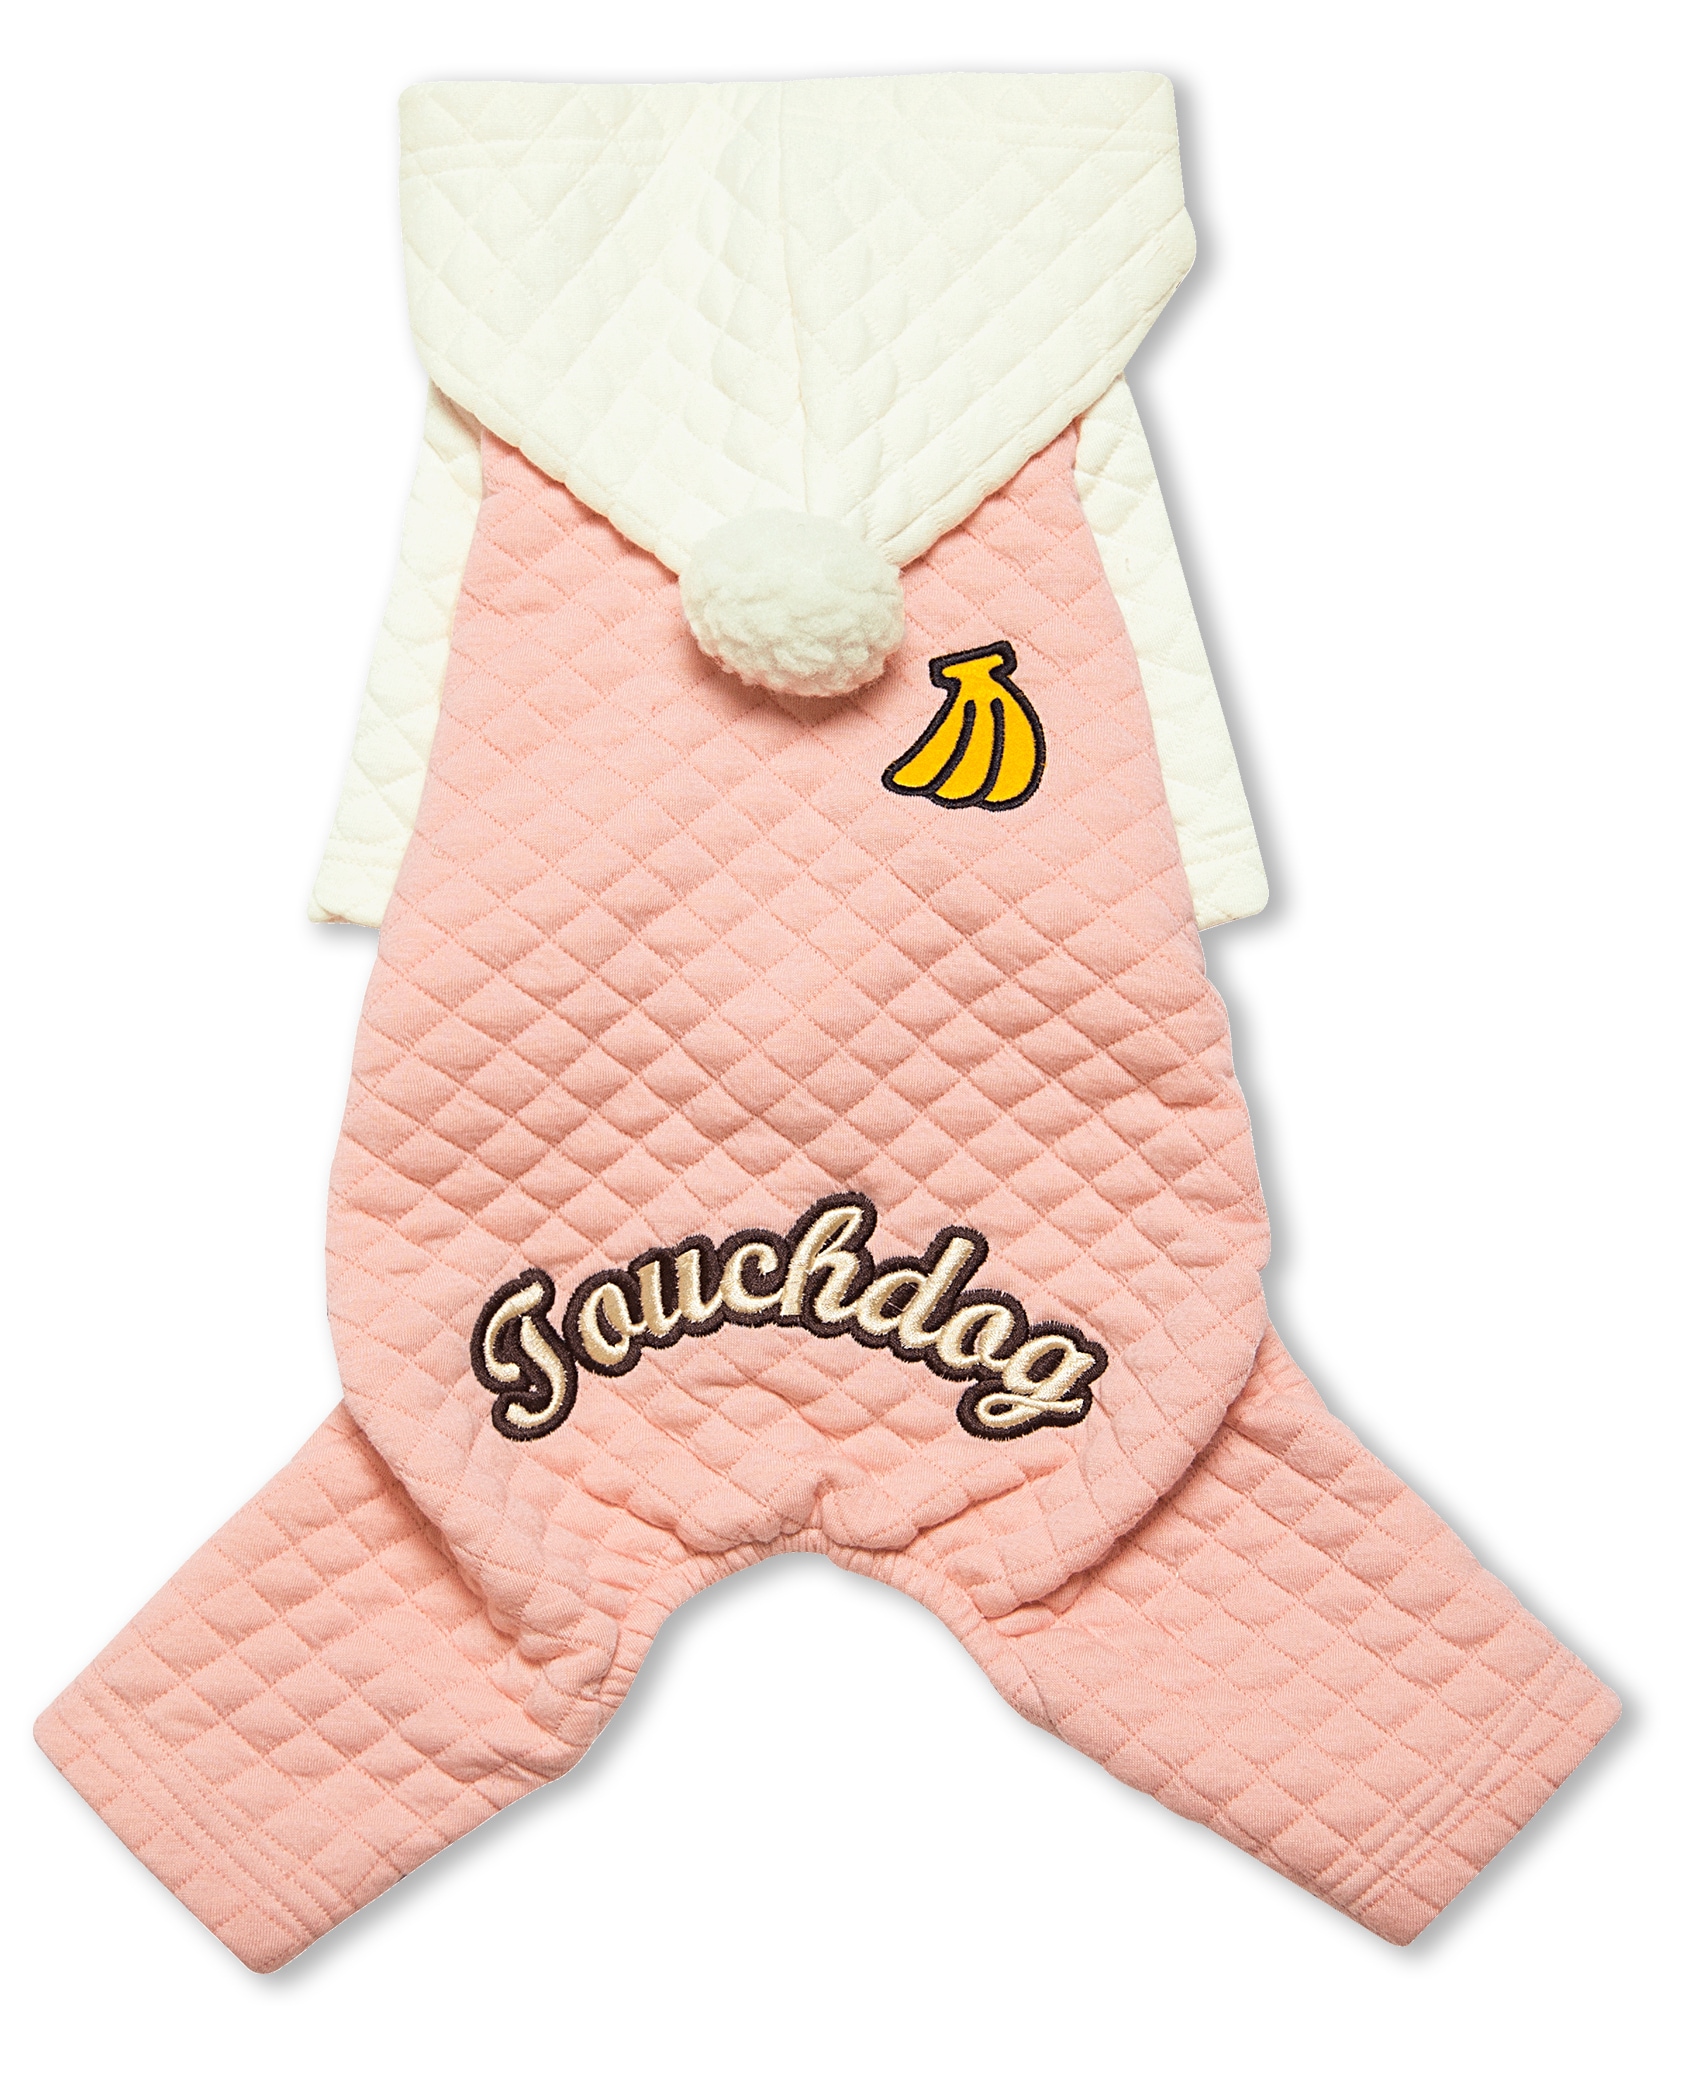 Fashion Designer Full Body Quilted Pet Dog Hooded Sweater - Unisex, Small, Pink/White, Polyester, Machine Wash - Pet Clothing | - Touchdog HD7PKSM